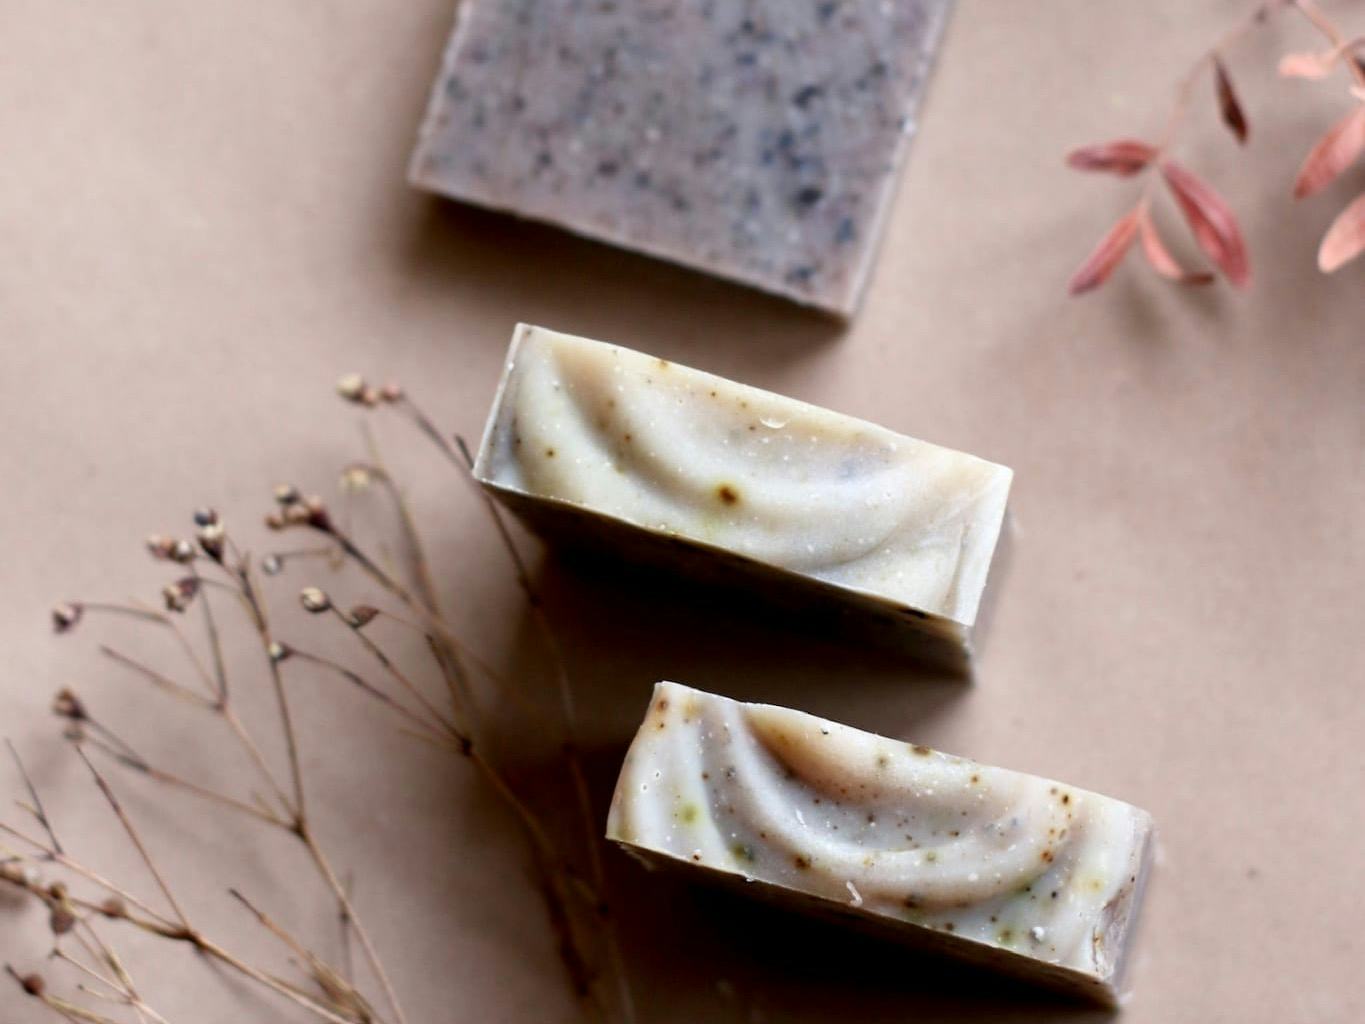 Handmade soap with Propolis and essential oils of Anise and Vanilla, Quantum Satis Workshop, Uetikon am See, image 3 | Mimelis